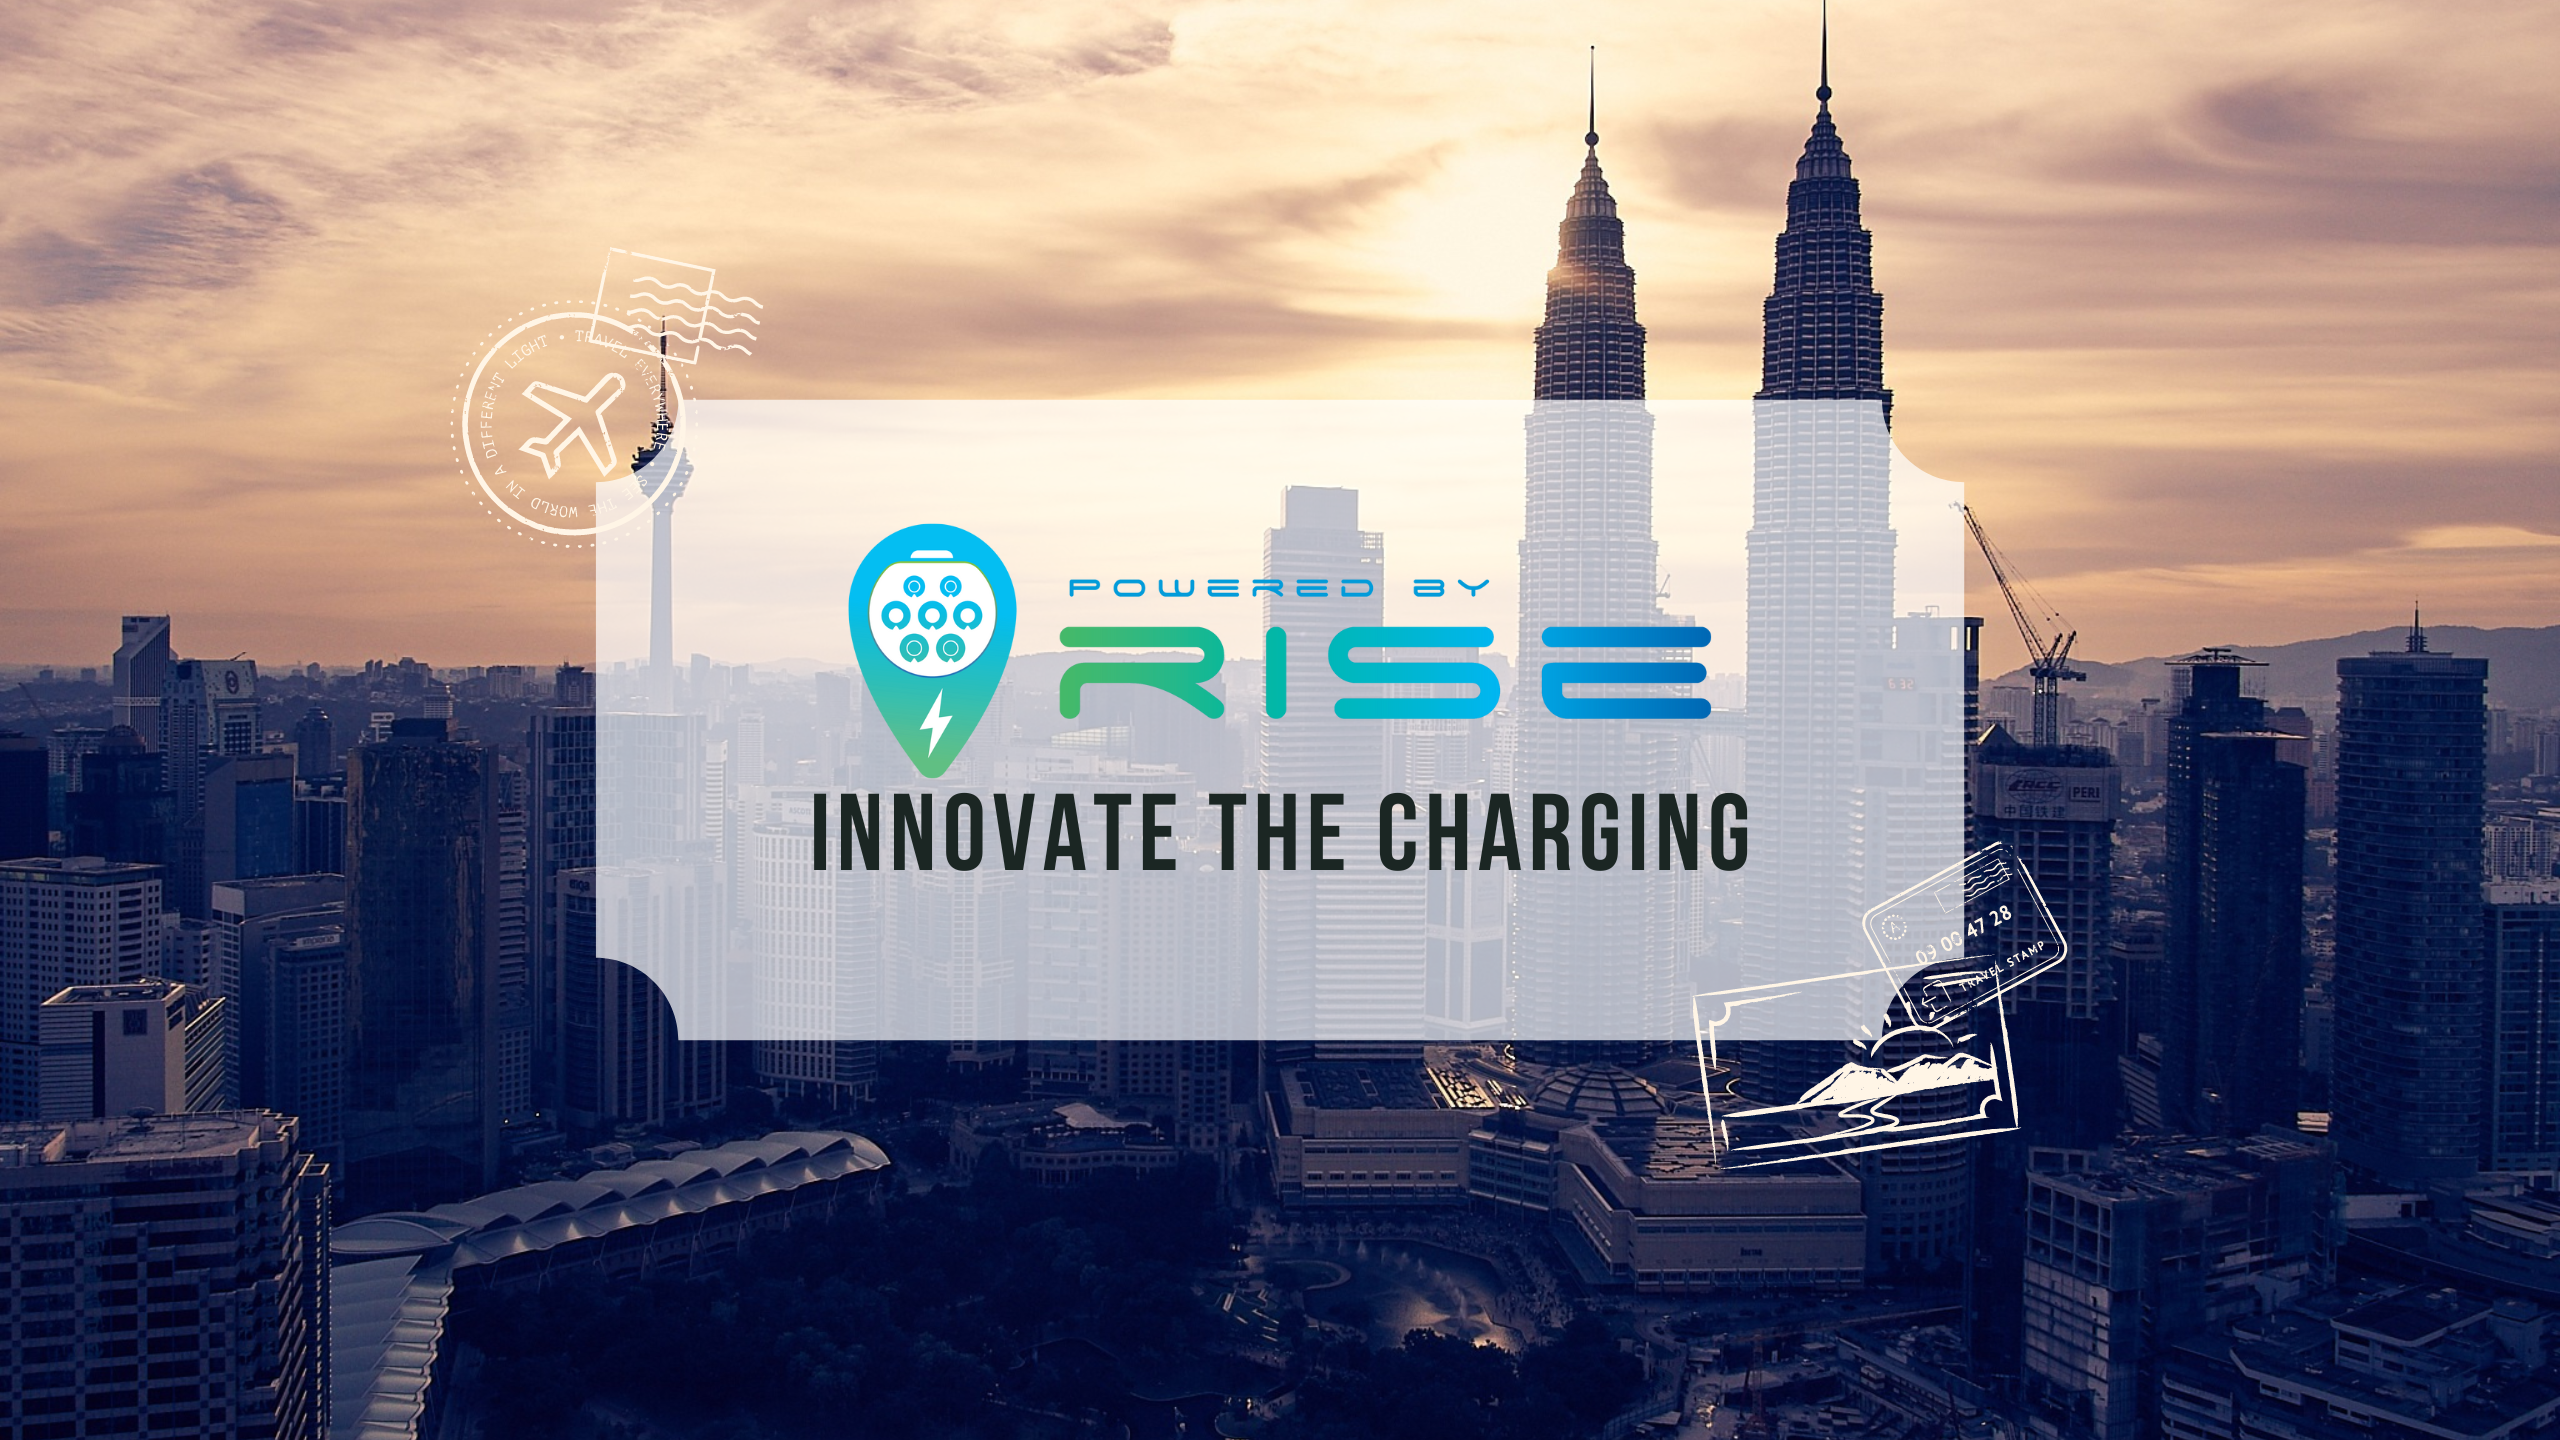 Powered by RISE